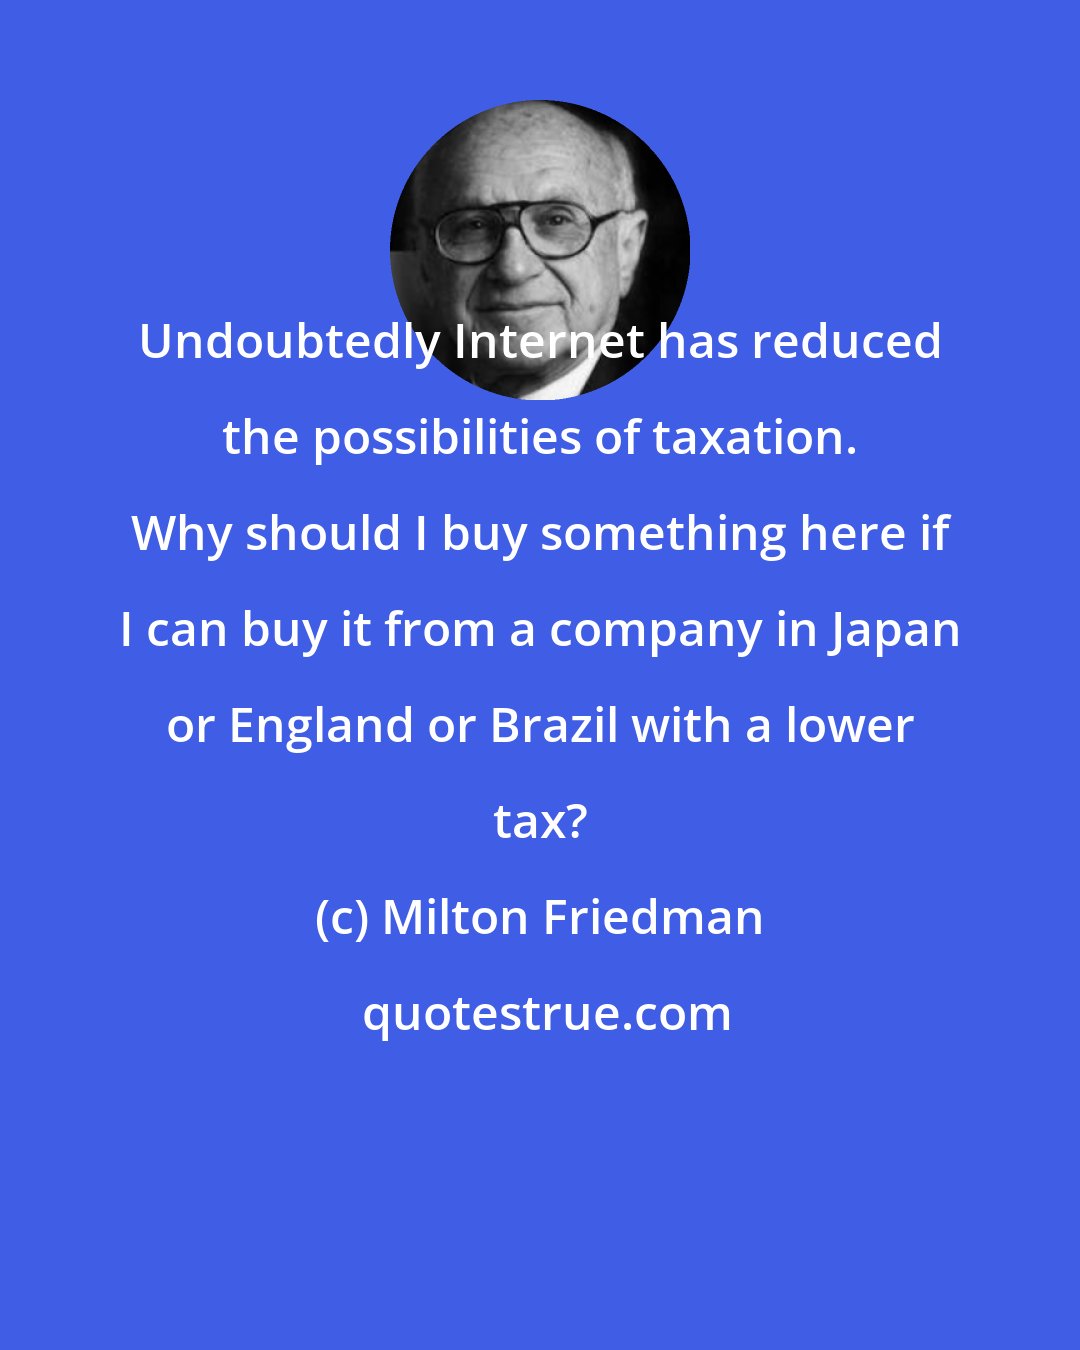 Milton Friedman: Undoubtedly Internet has reduced the possibilities of taxation. Why should I buy something here if I can buy it from a company in Japan or England or Brazil with a lower tax?